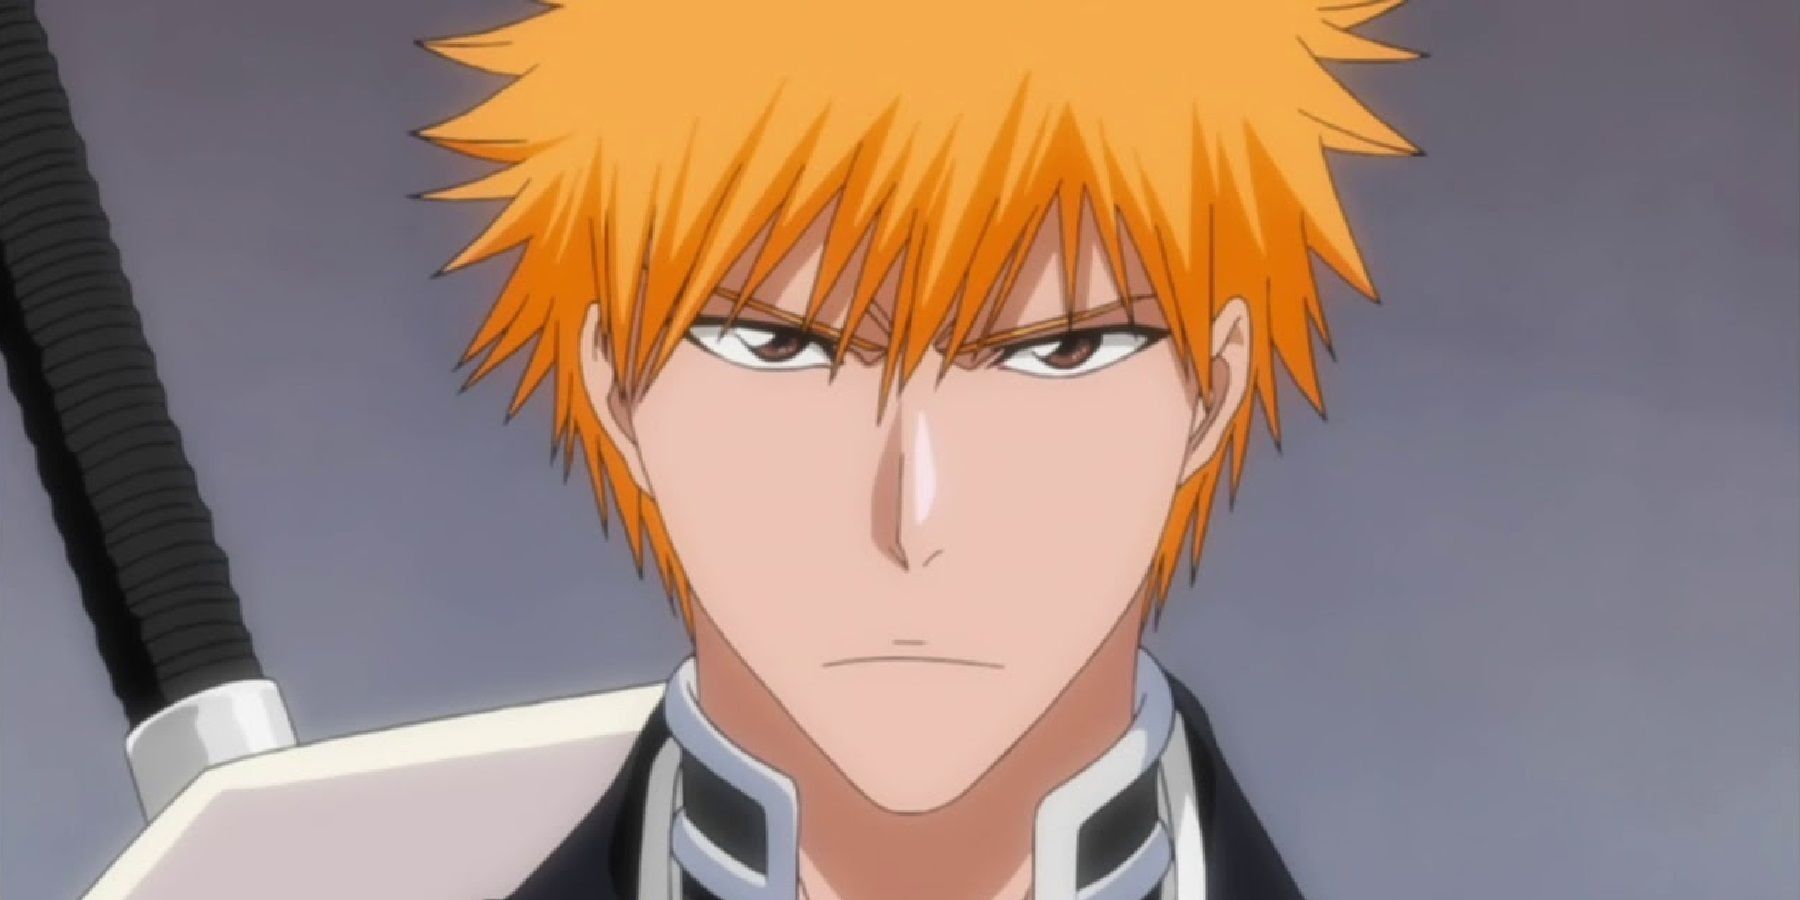 A New Bleach Game Could be in the Works